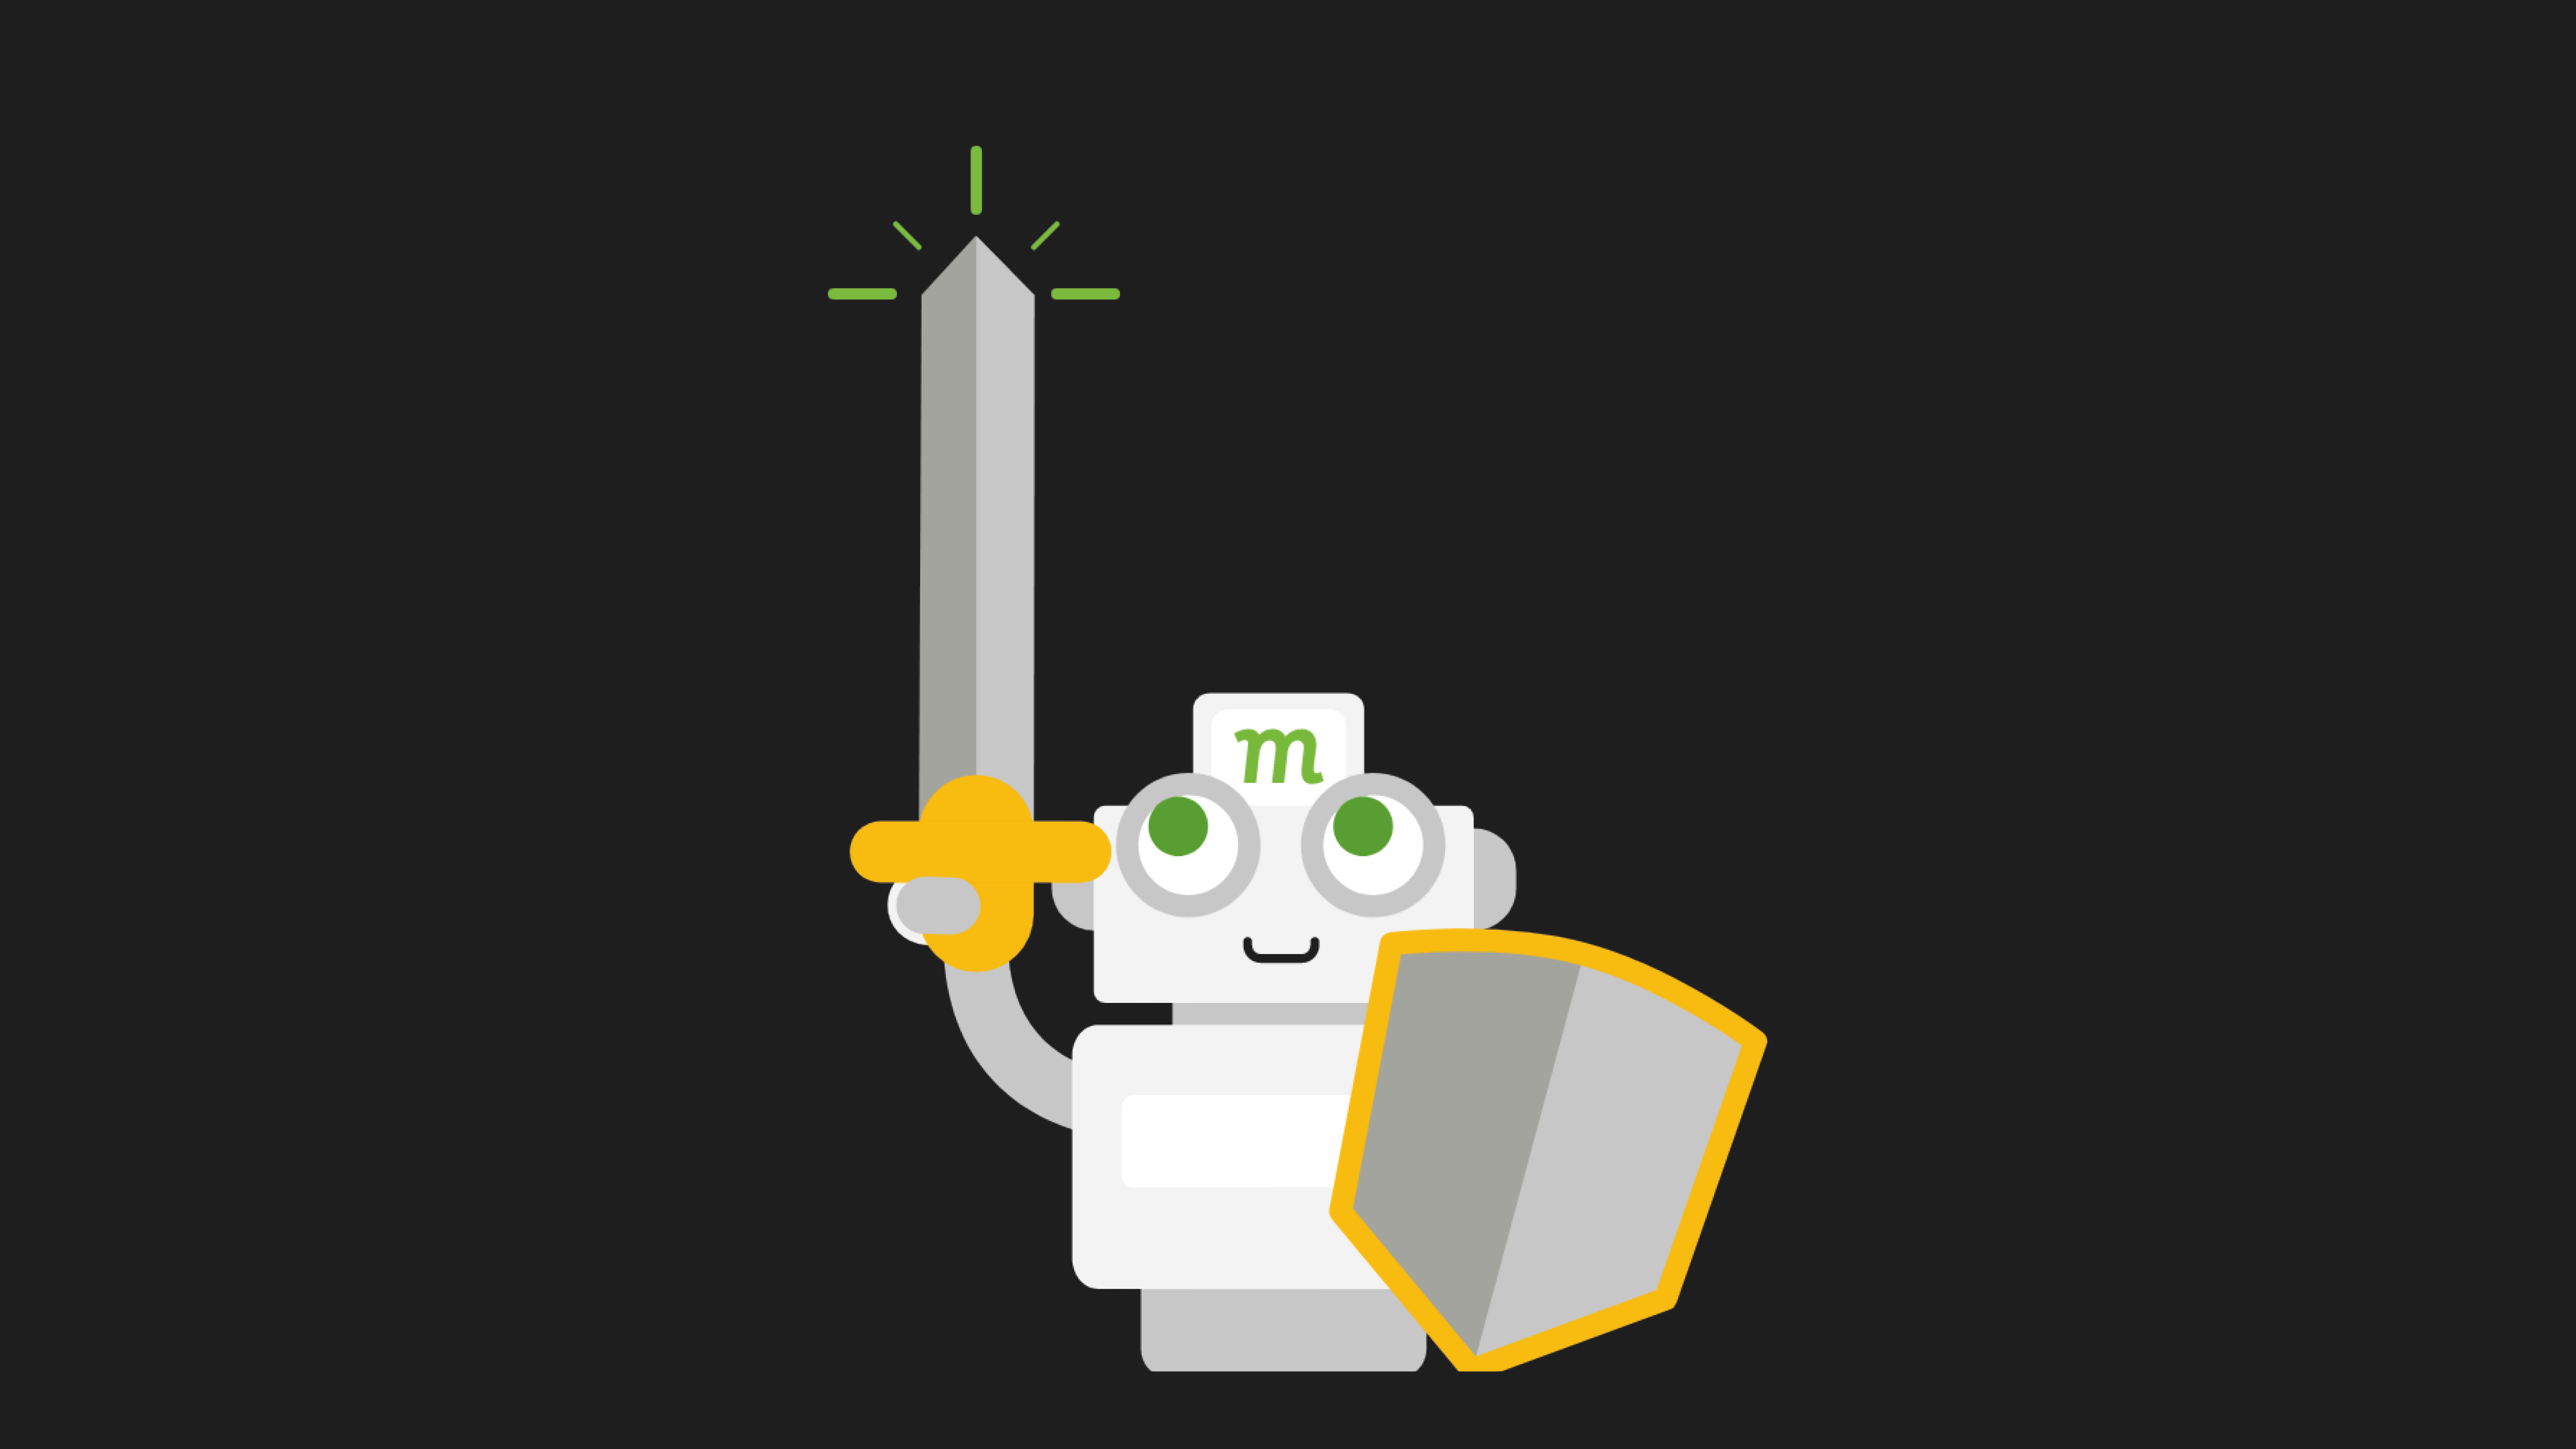 MojeekBot with a sword